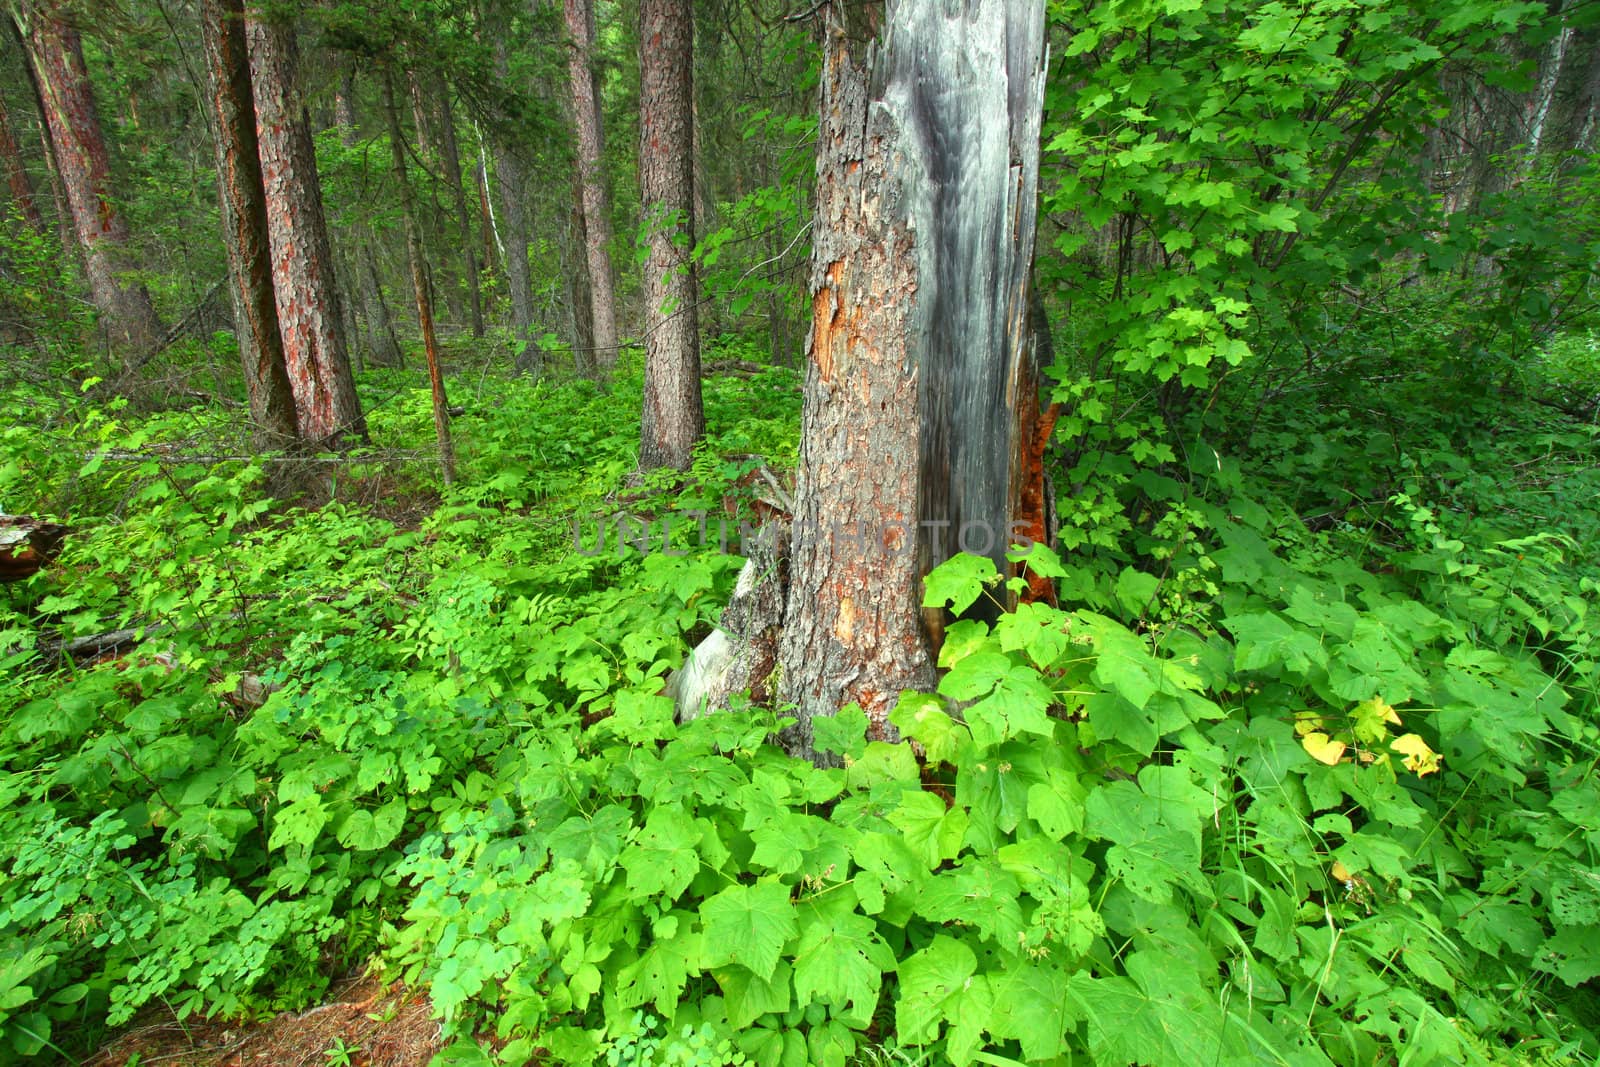 Lush green vegetation covers the forest floor at Glacier National Park in the United States.